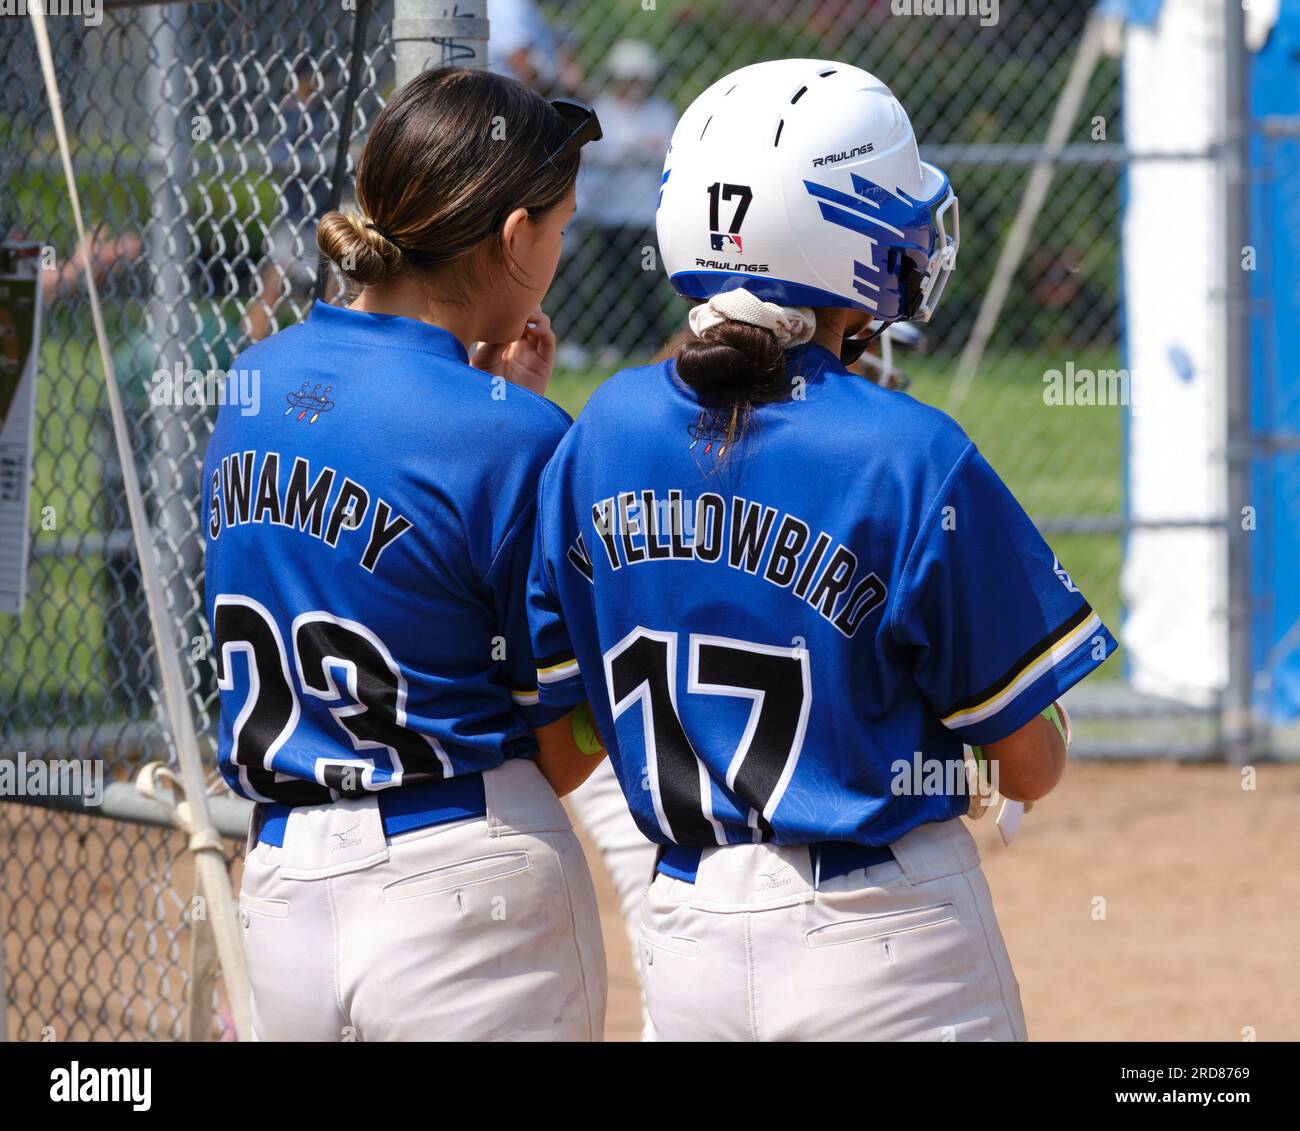 NAIG 2023 Softball tournament- Two Team Alberta Female player from back  with names on jersey looking from dugout. Halifax July 2023 Stock Photo -  Alamy